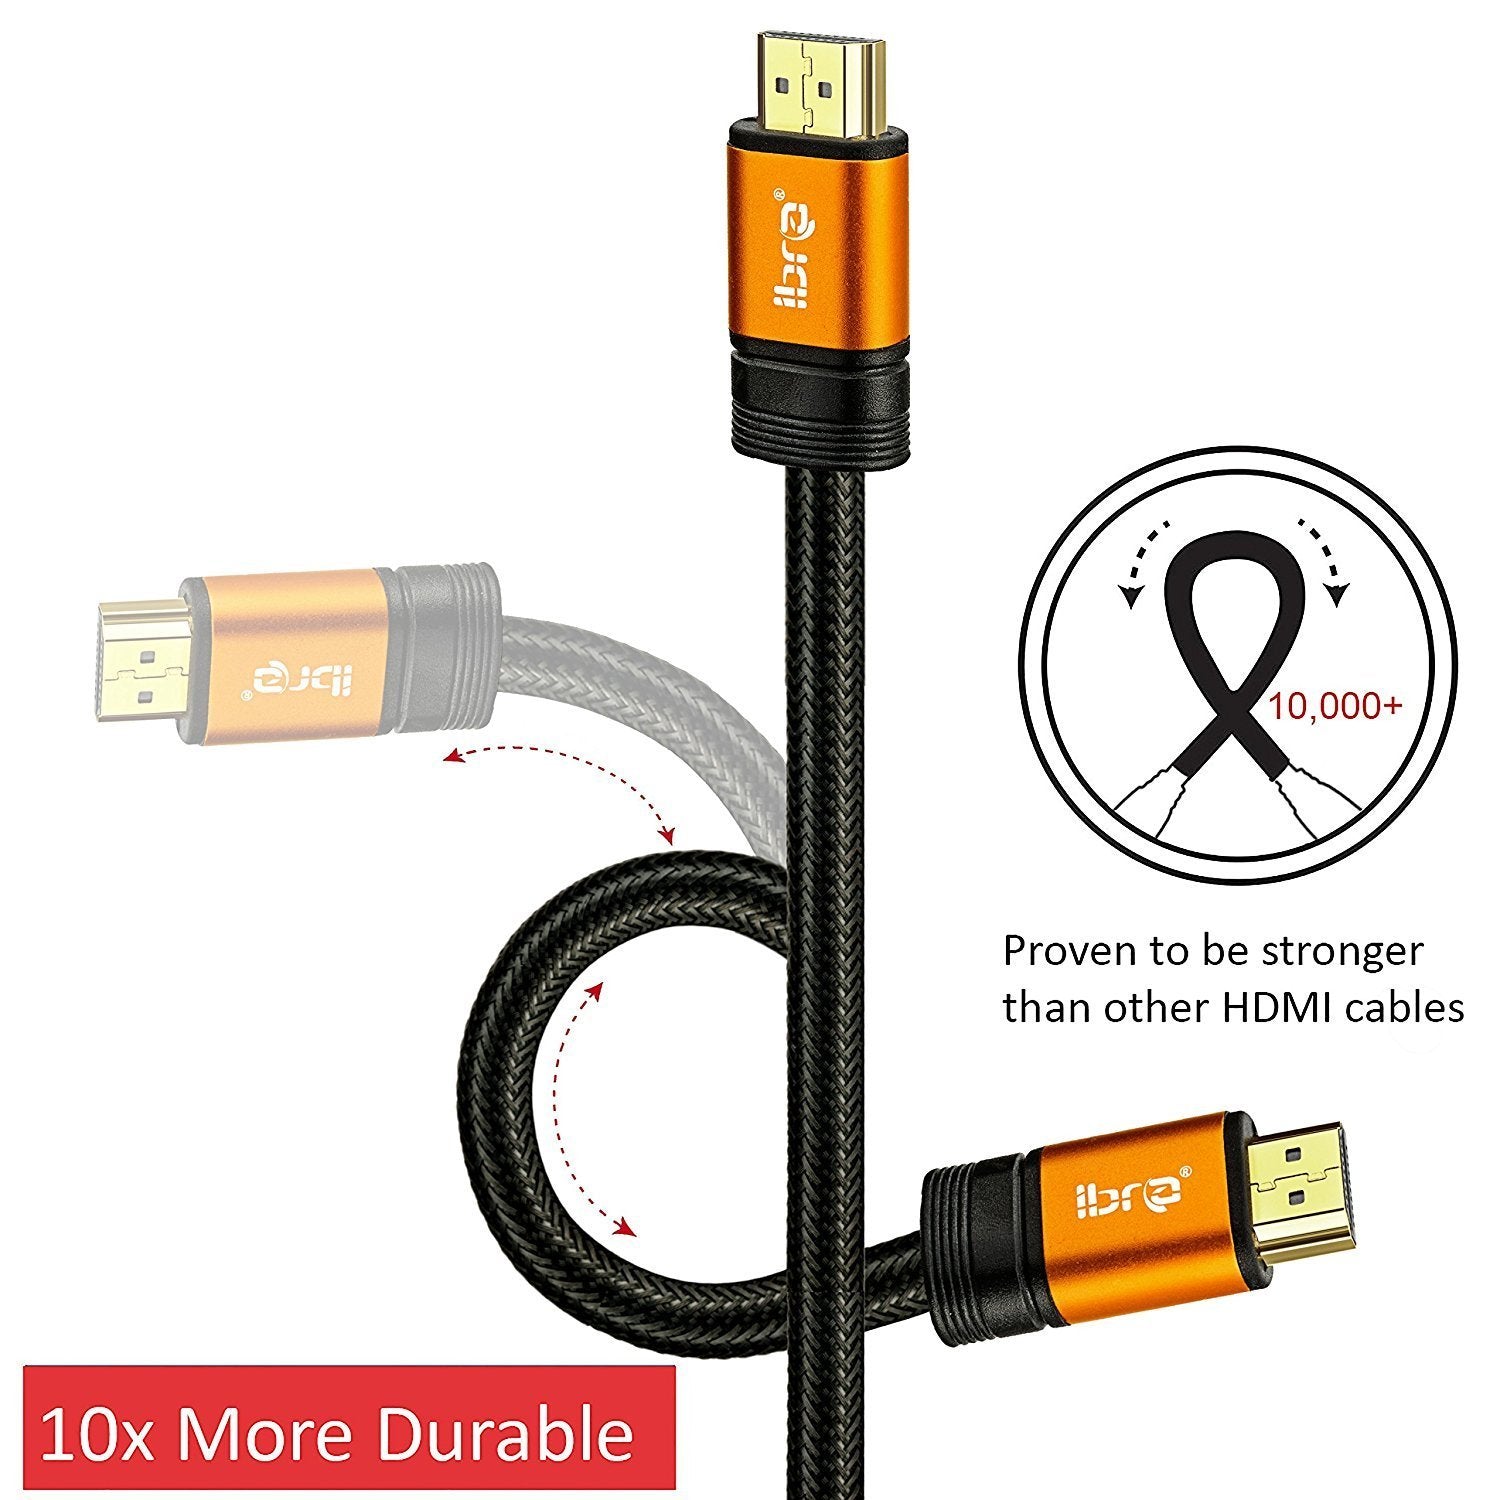 IBRA Orange HDMI Cable 10M - UHD HDMI 2.0 (4K@60Hz) Ready -18Gbps-28AWG Braided Cord -Gold Plated Connectors -Ethernet,Audio Return-Video 4K 2160p,HD 1080p,3D -Xbox PlayStation PS3 PS4 PC Apple TV